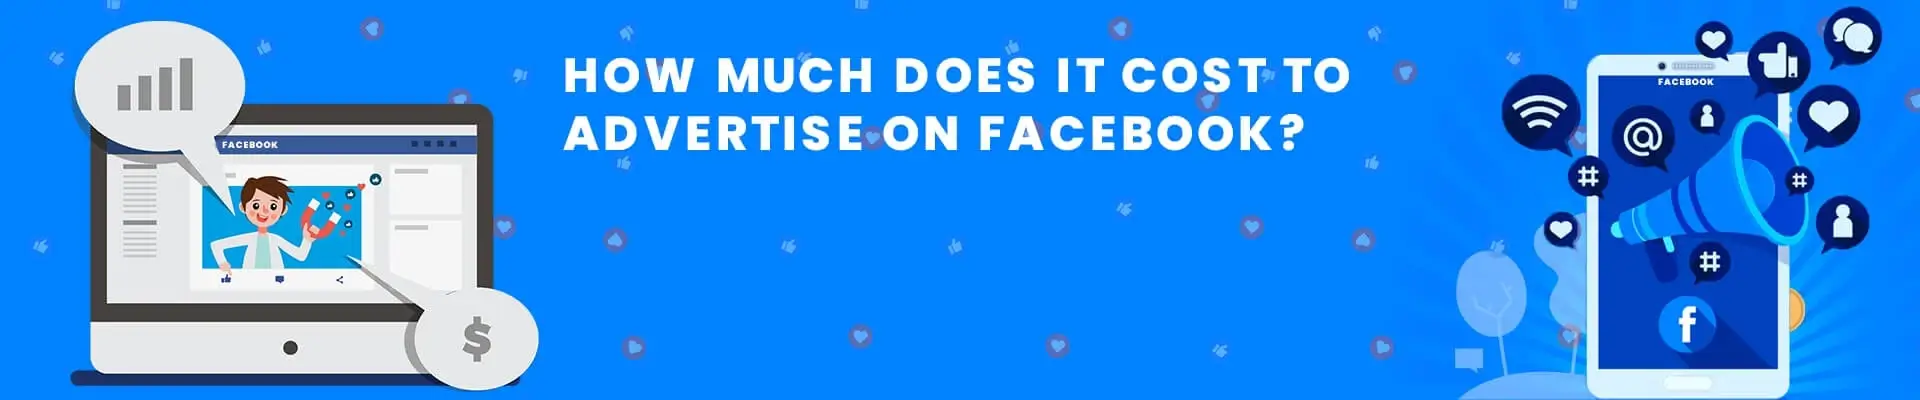 How Much Does It Cost To Advertise on Facebook? [2021]